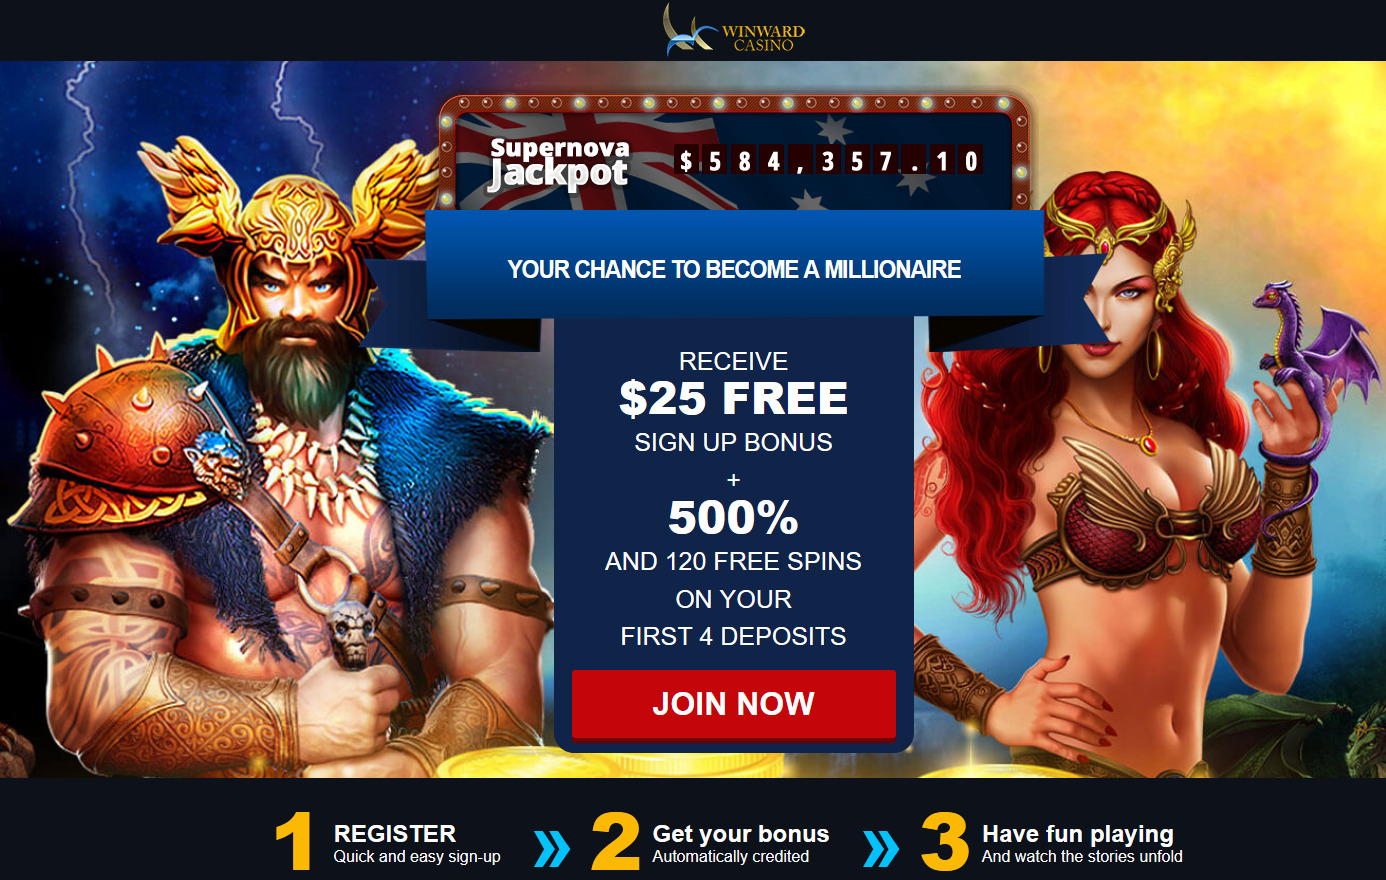 Receive $25 Free Sign Up Bonus +
                                500% and 120 free spins on your first 4
                                deposits